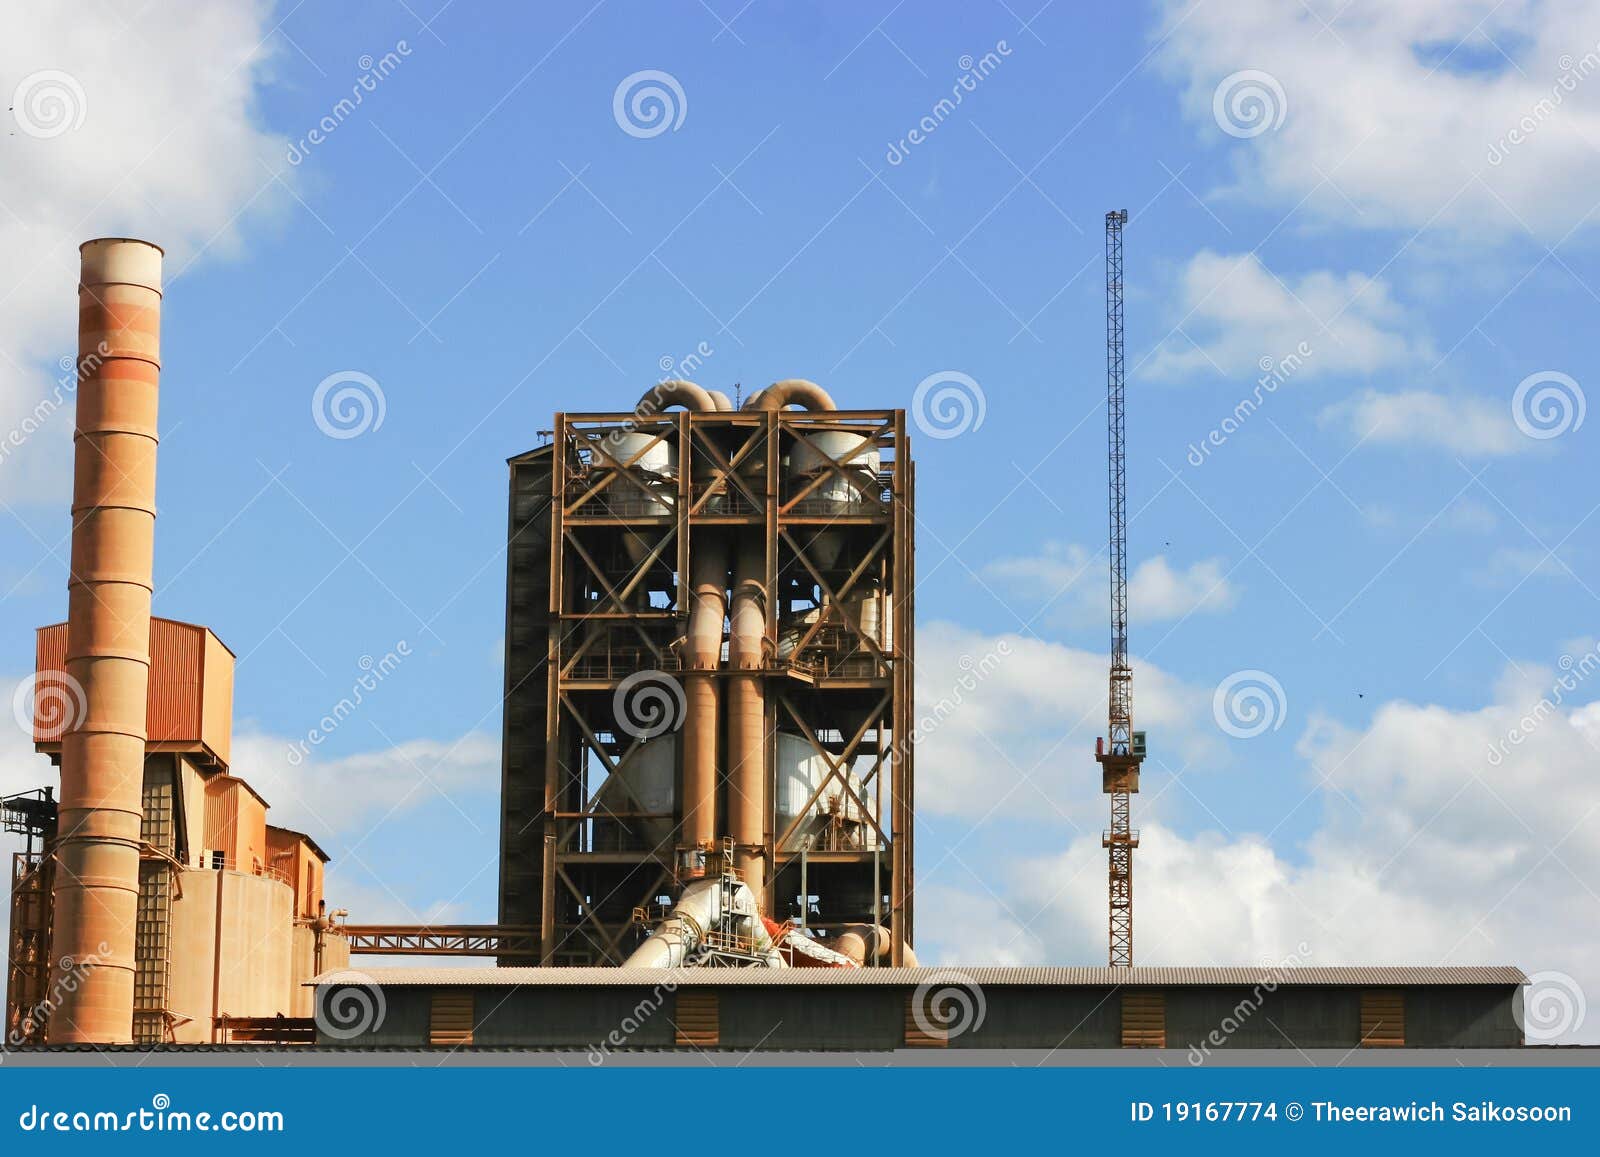 Industrial factory stock photo. Image of works, funnel - 19167774